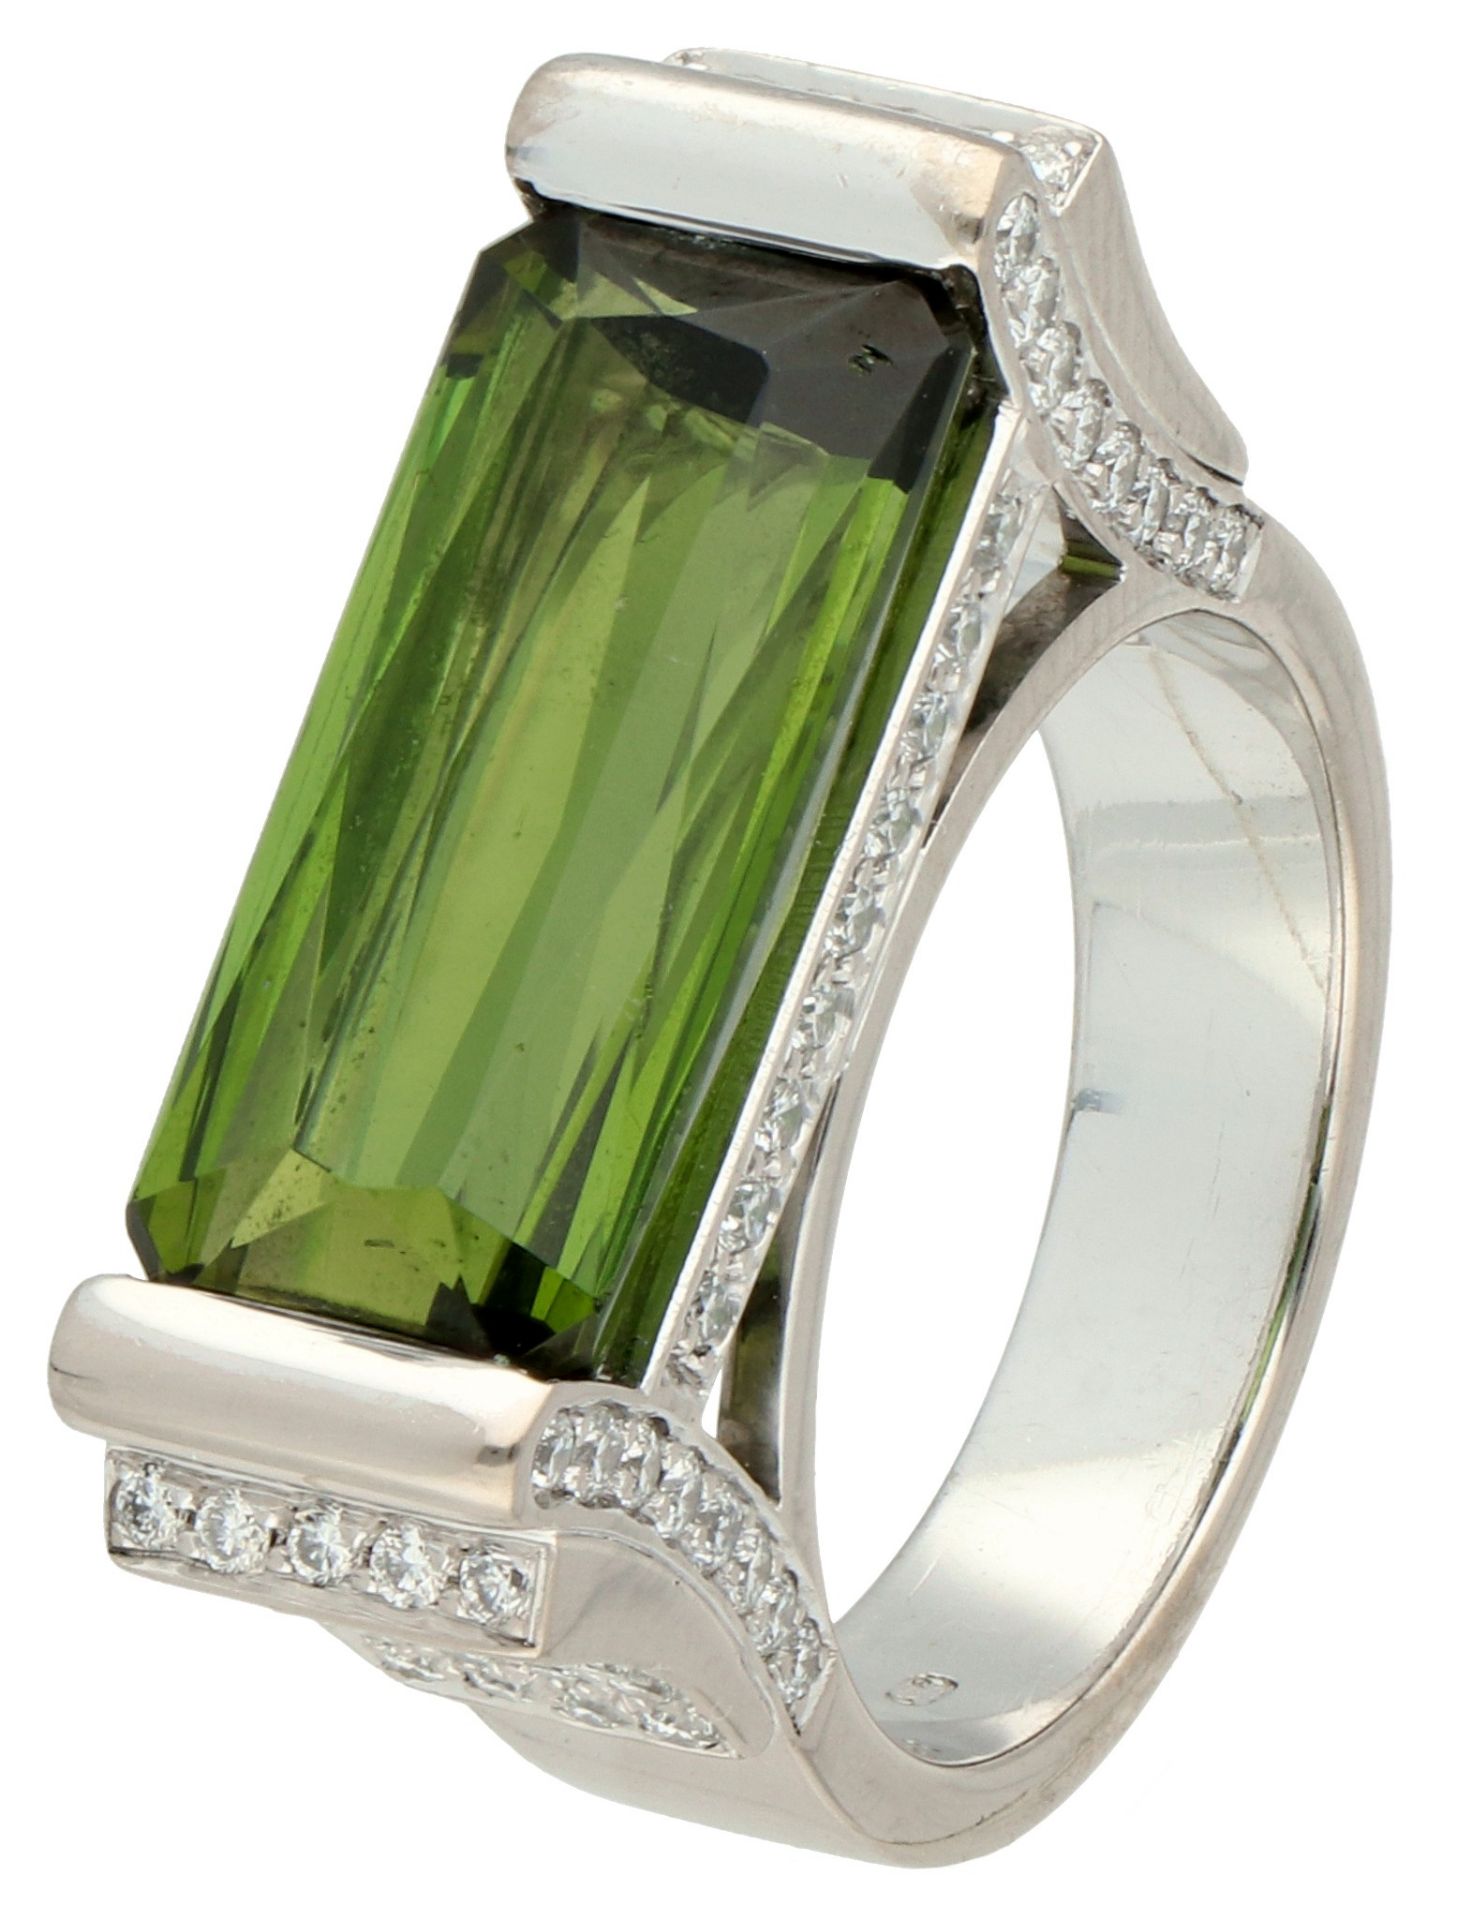 18K White gold designer ring set with approx. 6.03 ct. tourmaline and approx. 1 ct. diamond.